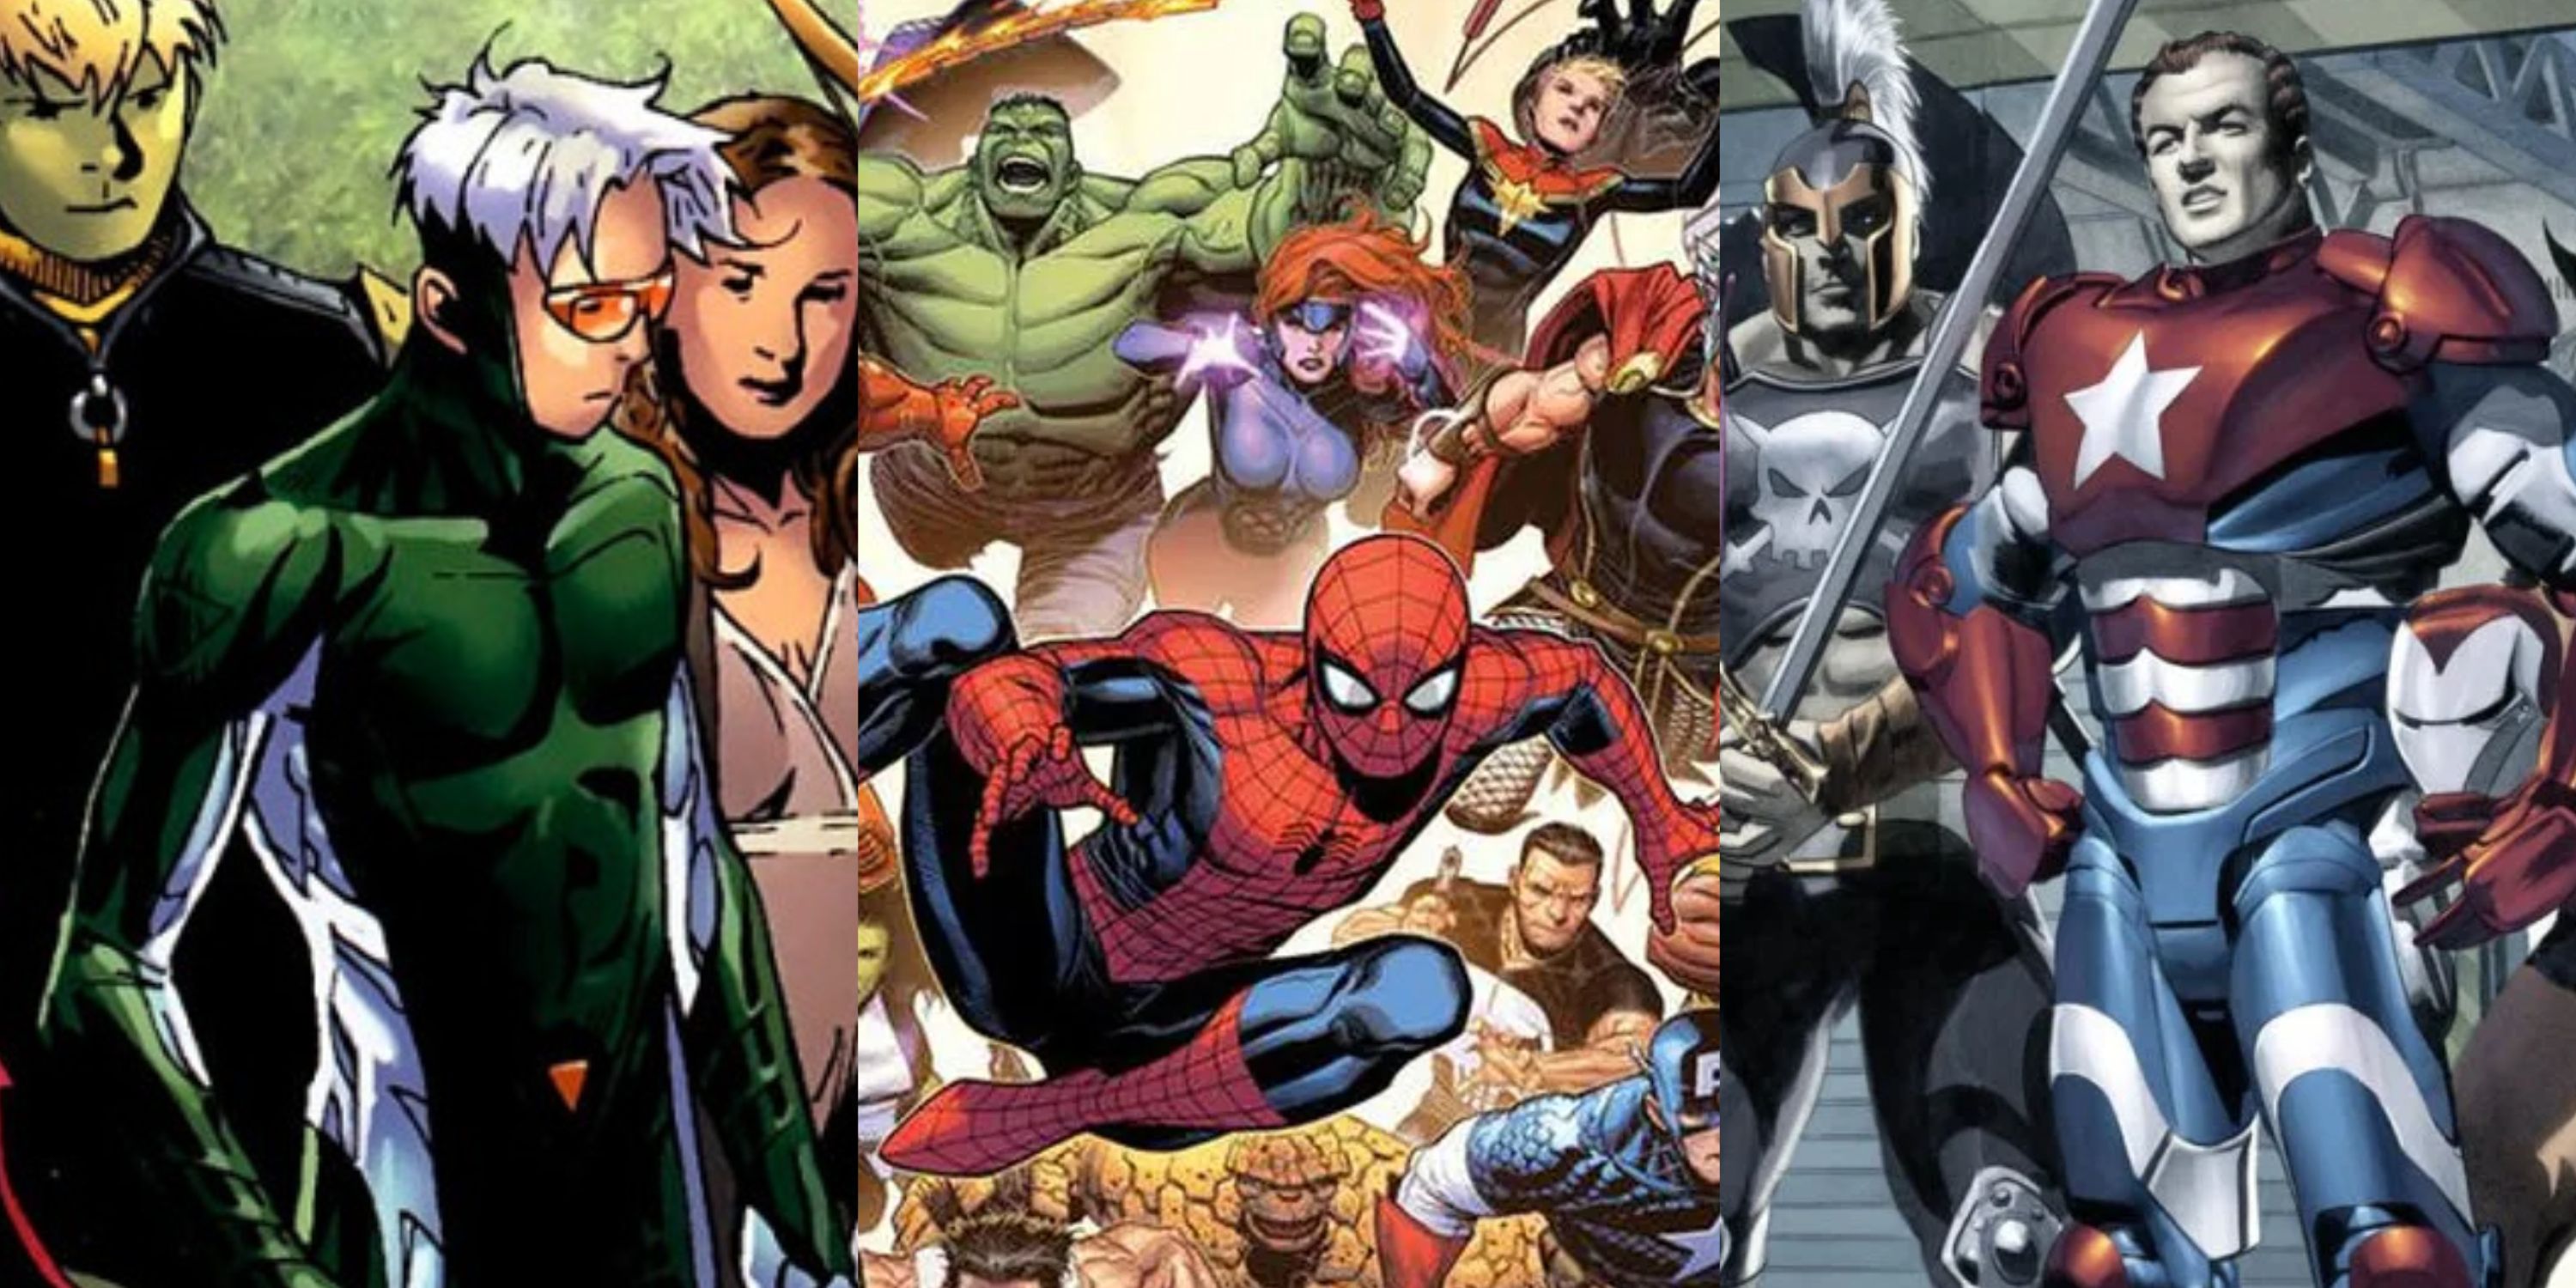 The divided image of the Young Avengers, Spider-Man leading the Avengers, and Norman Osborn's Dark Avengers